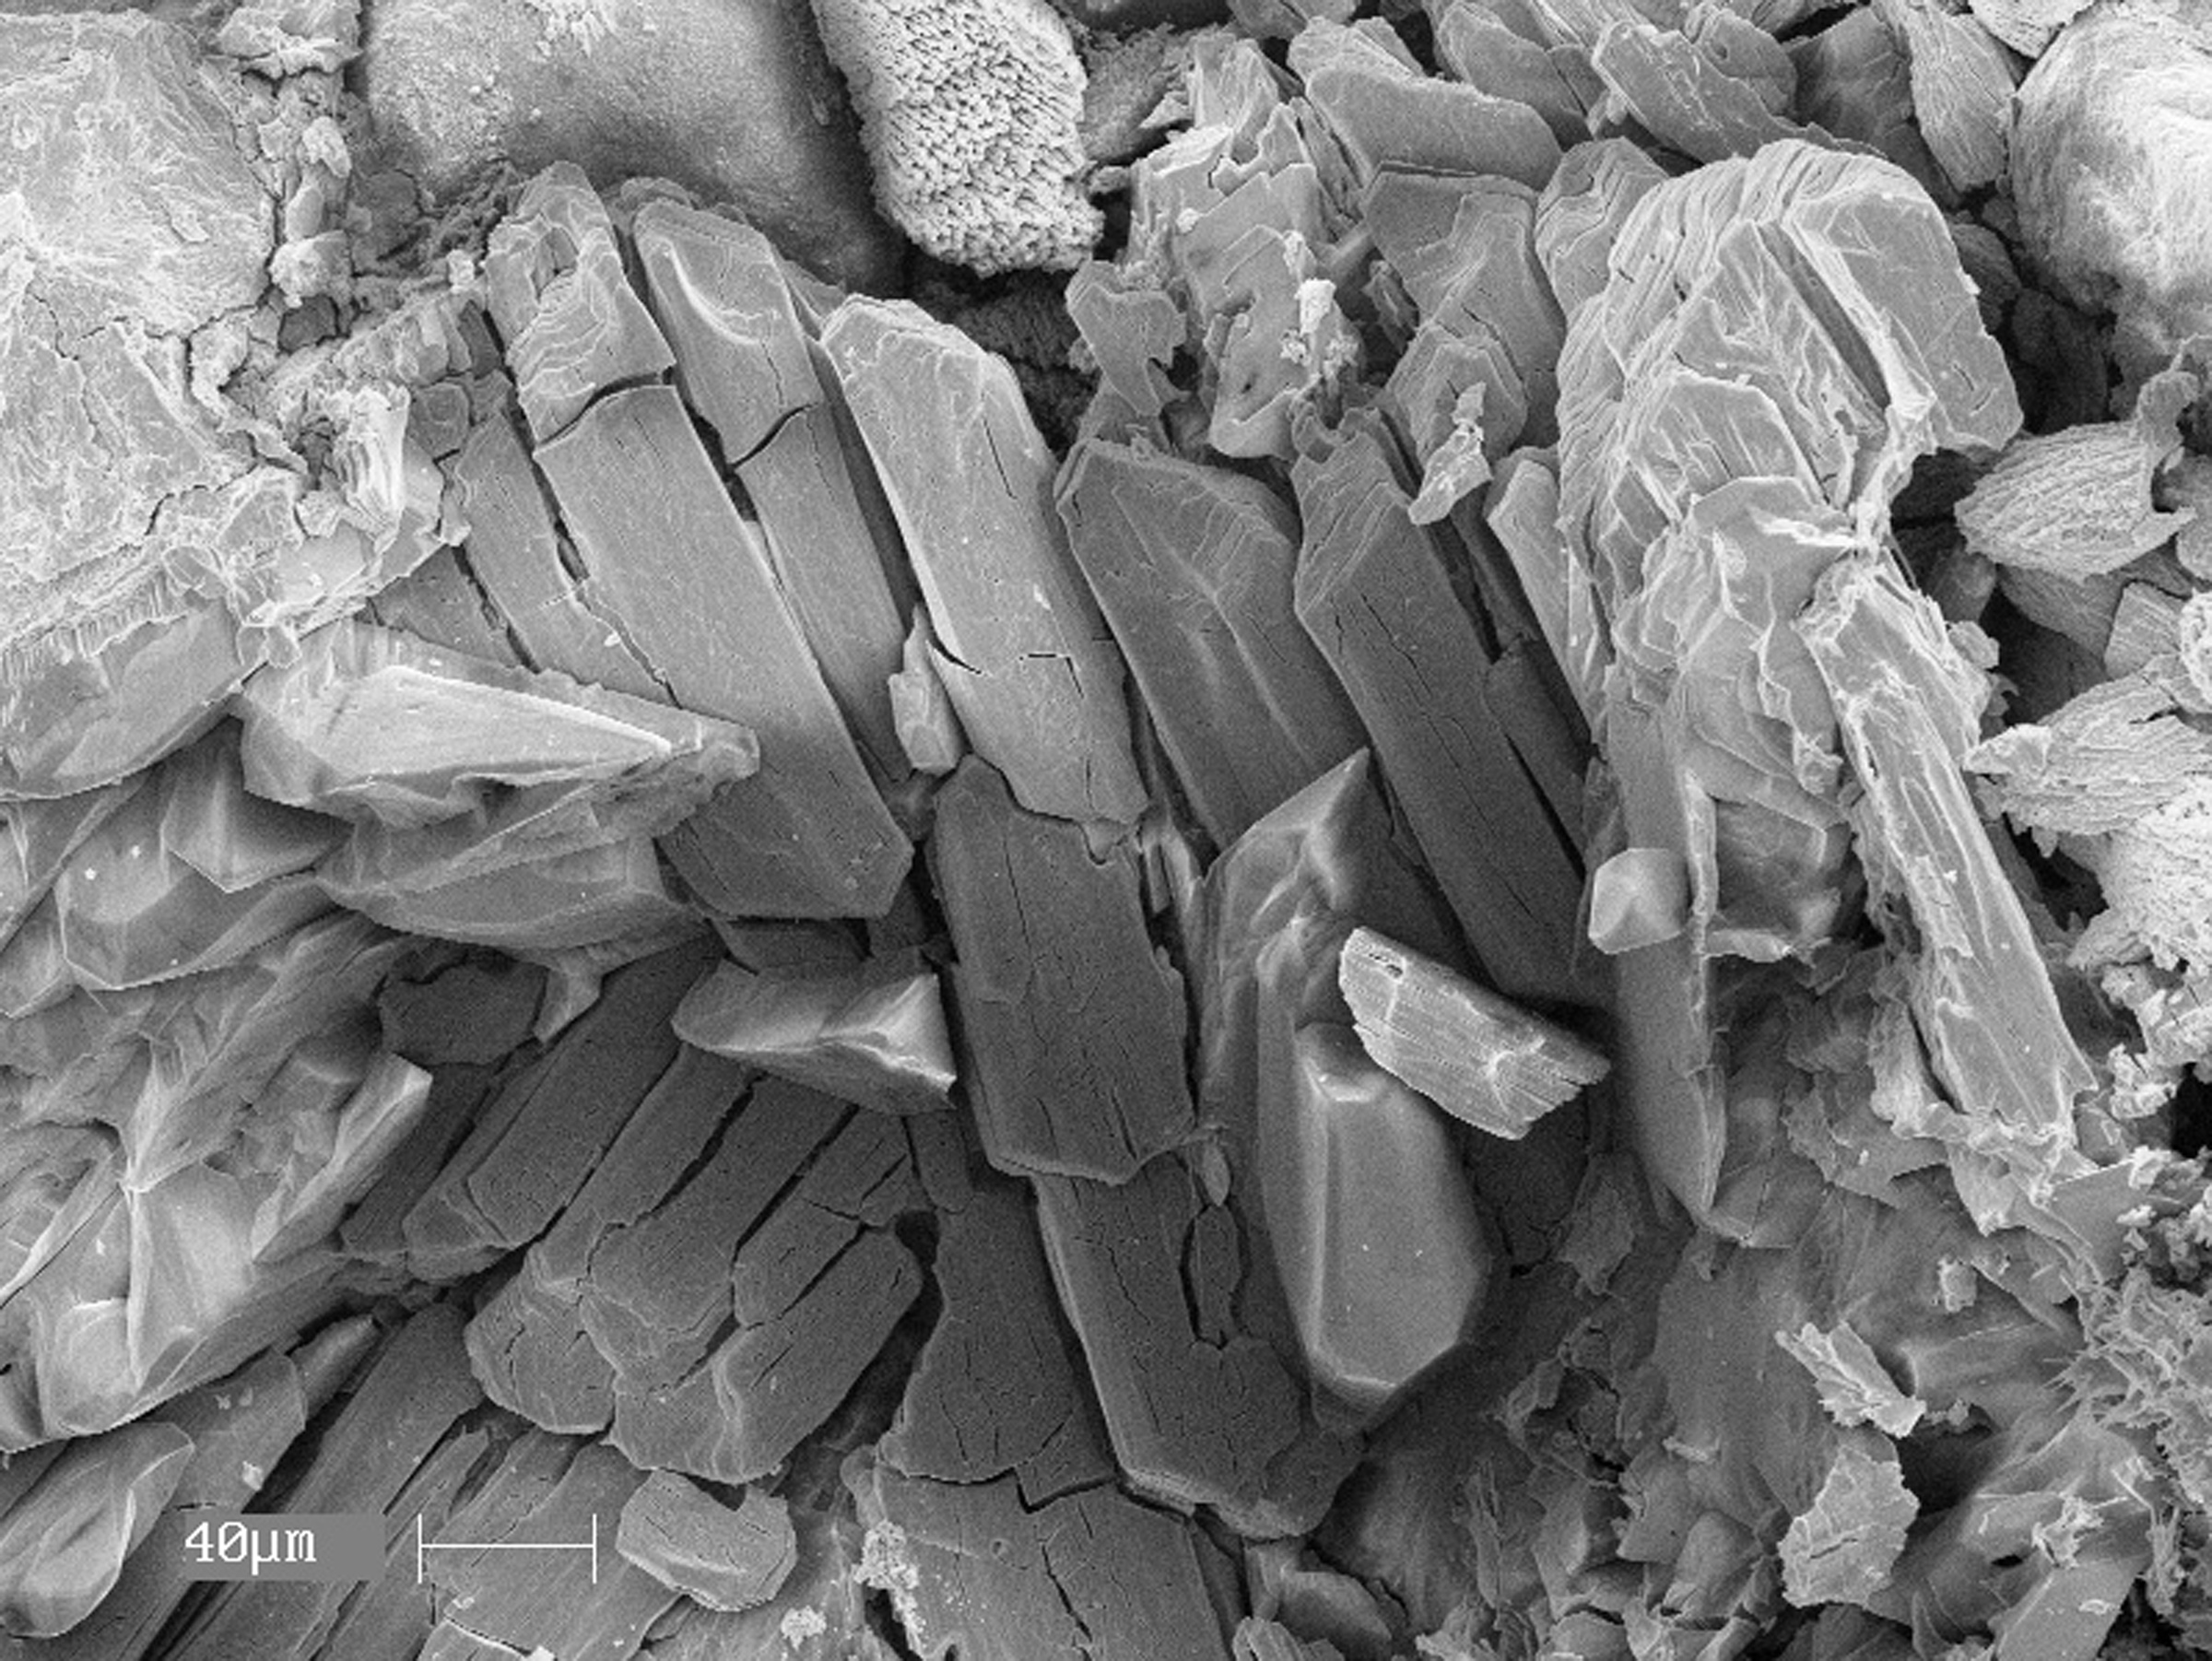 This scanning electron microscope image shows crystals of the mineral nashite – named in honor of University of Utah geologist Barbara Nash – from the old Little Eva uranium mine near Moab, Utah.